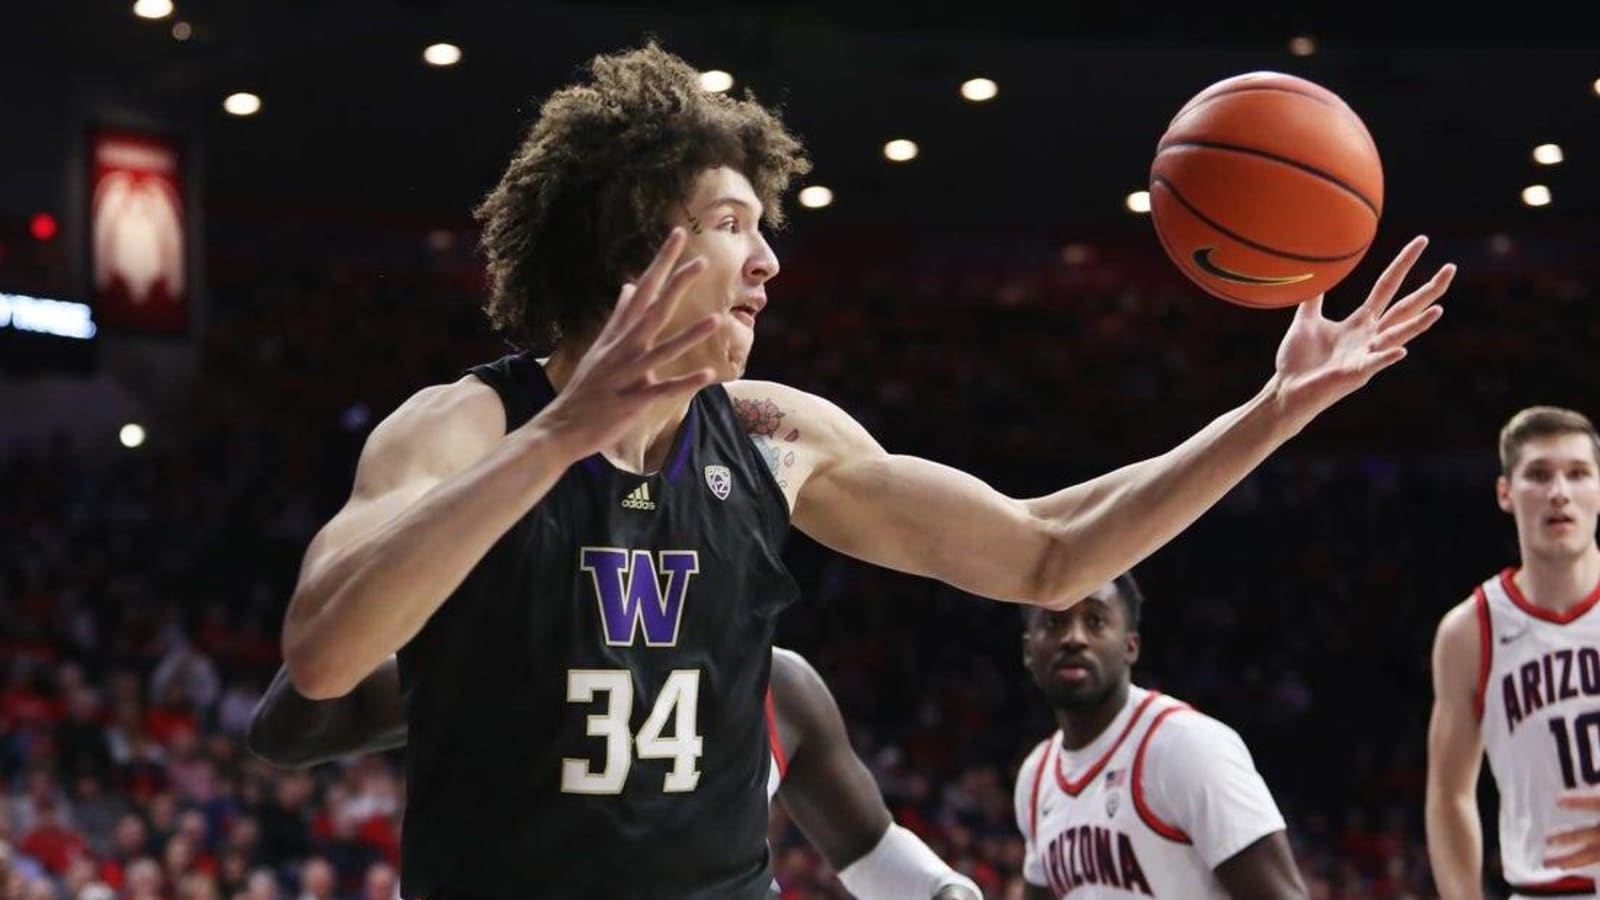 Washington finding its stride with Cal up next